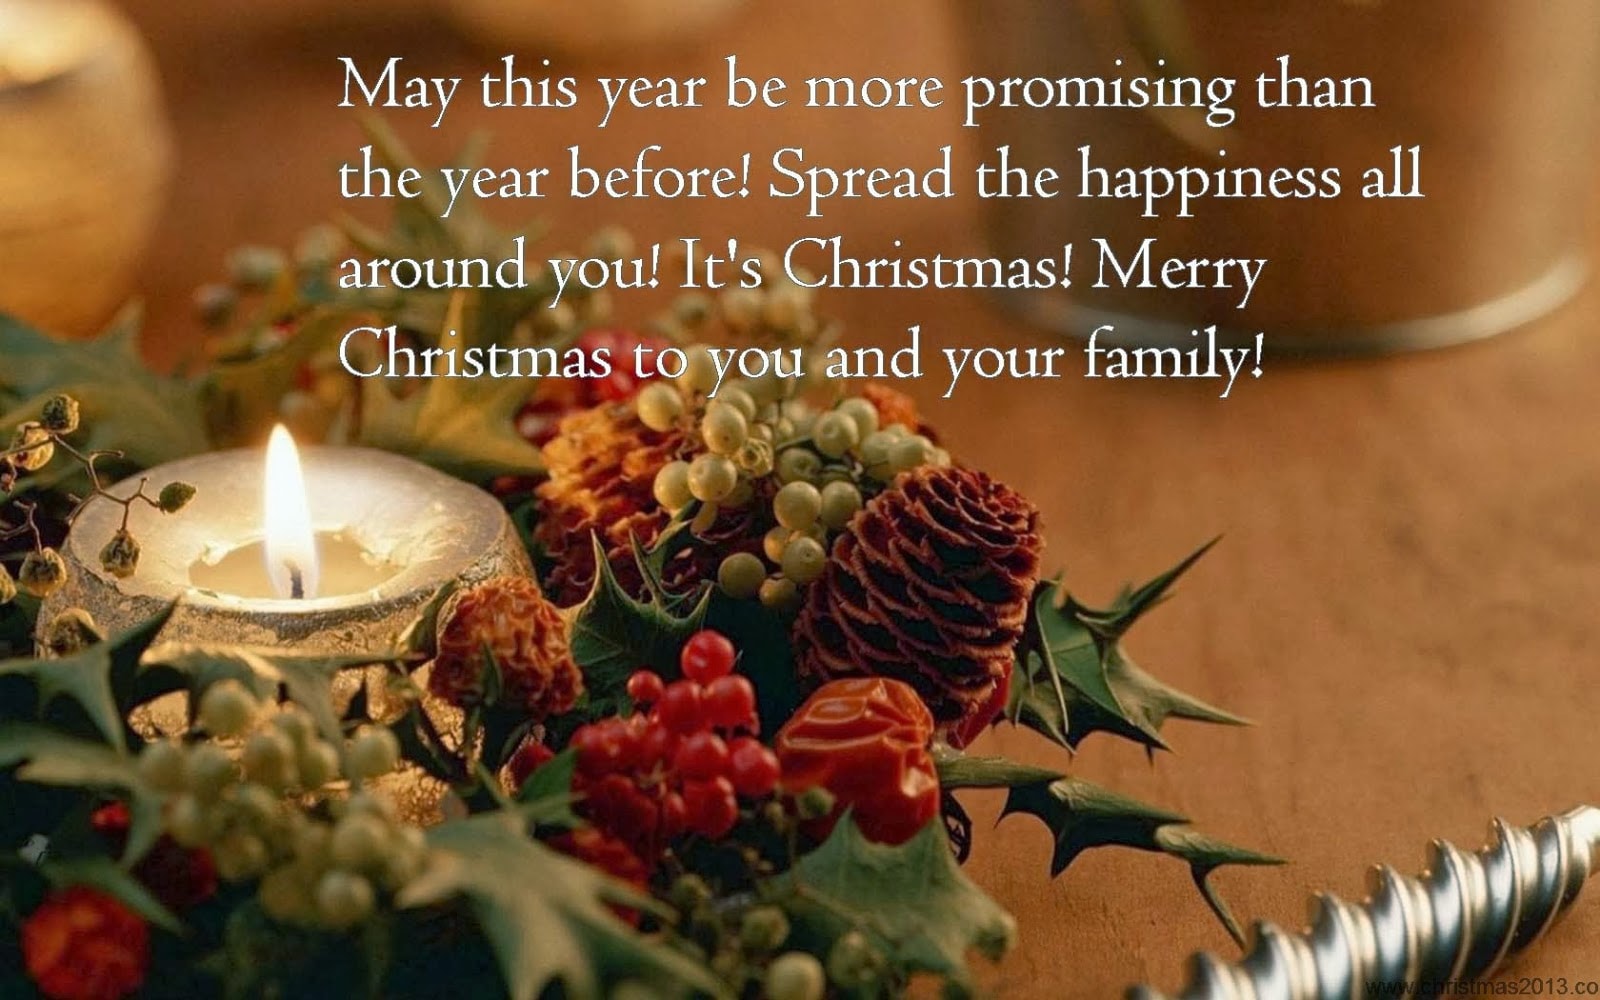 merry-christmas-wishes-for-friends-on-facebook-quotes-greetings